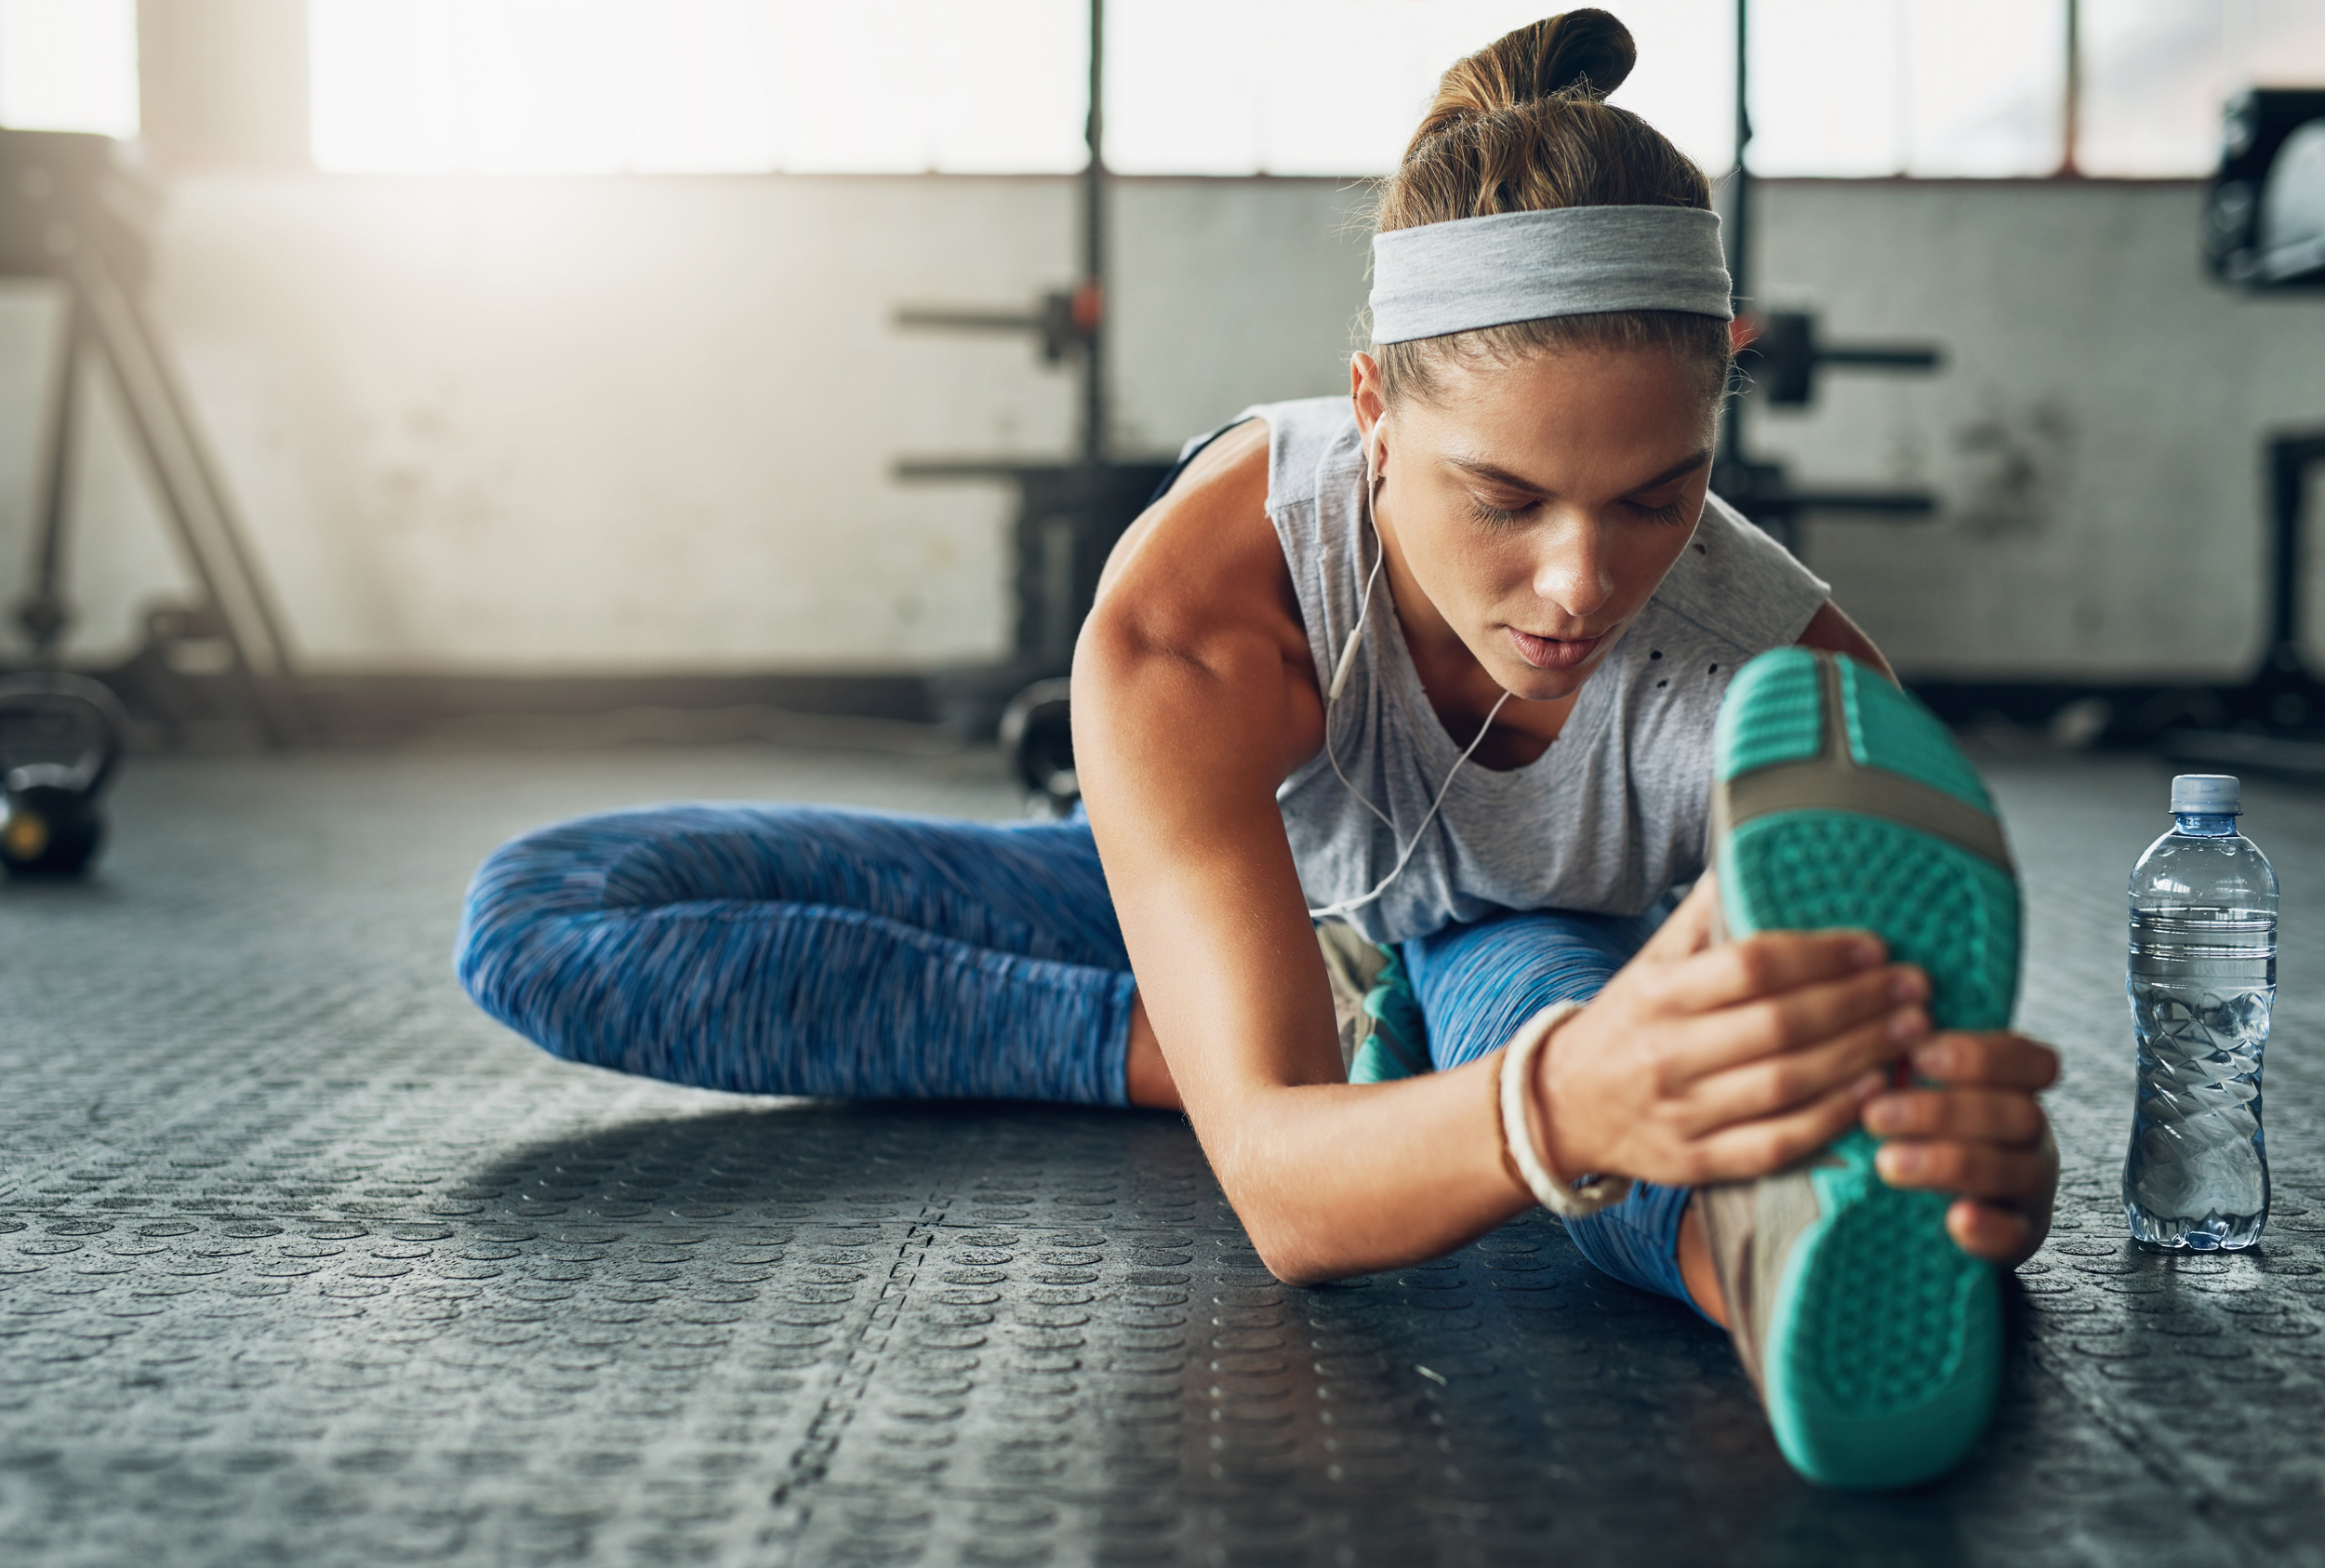 Get Started With HIIT & Get Its Benefits